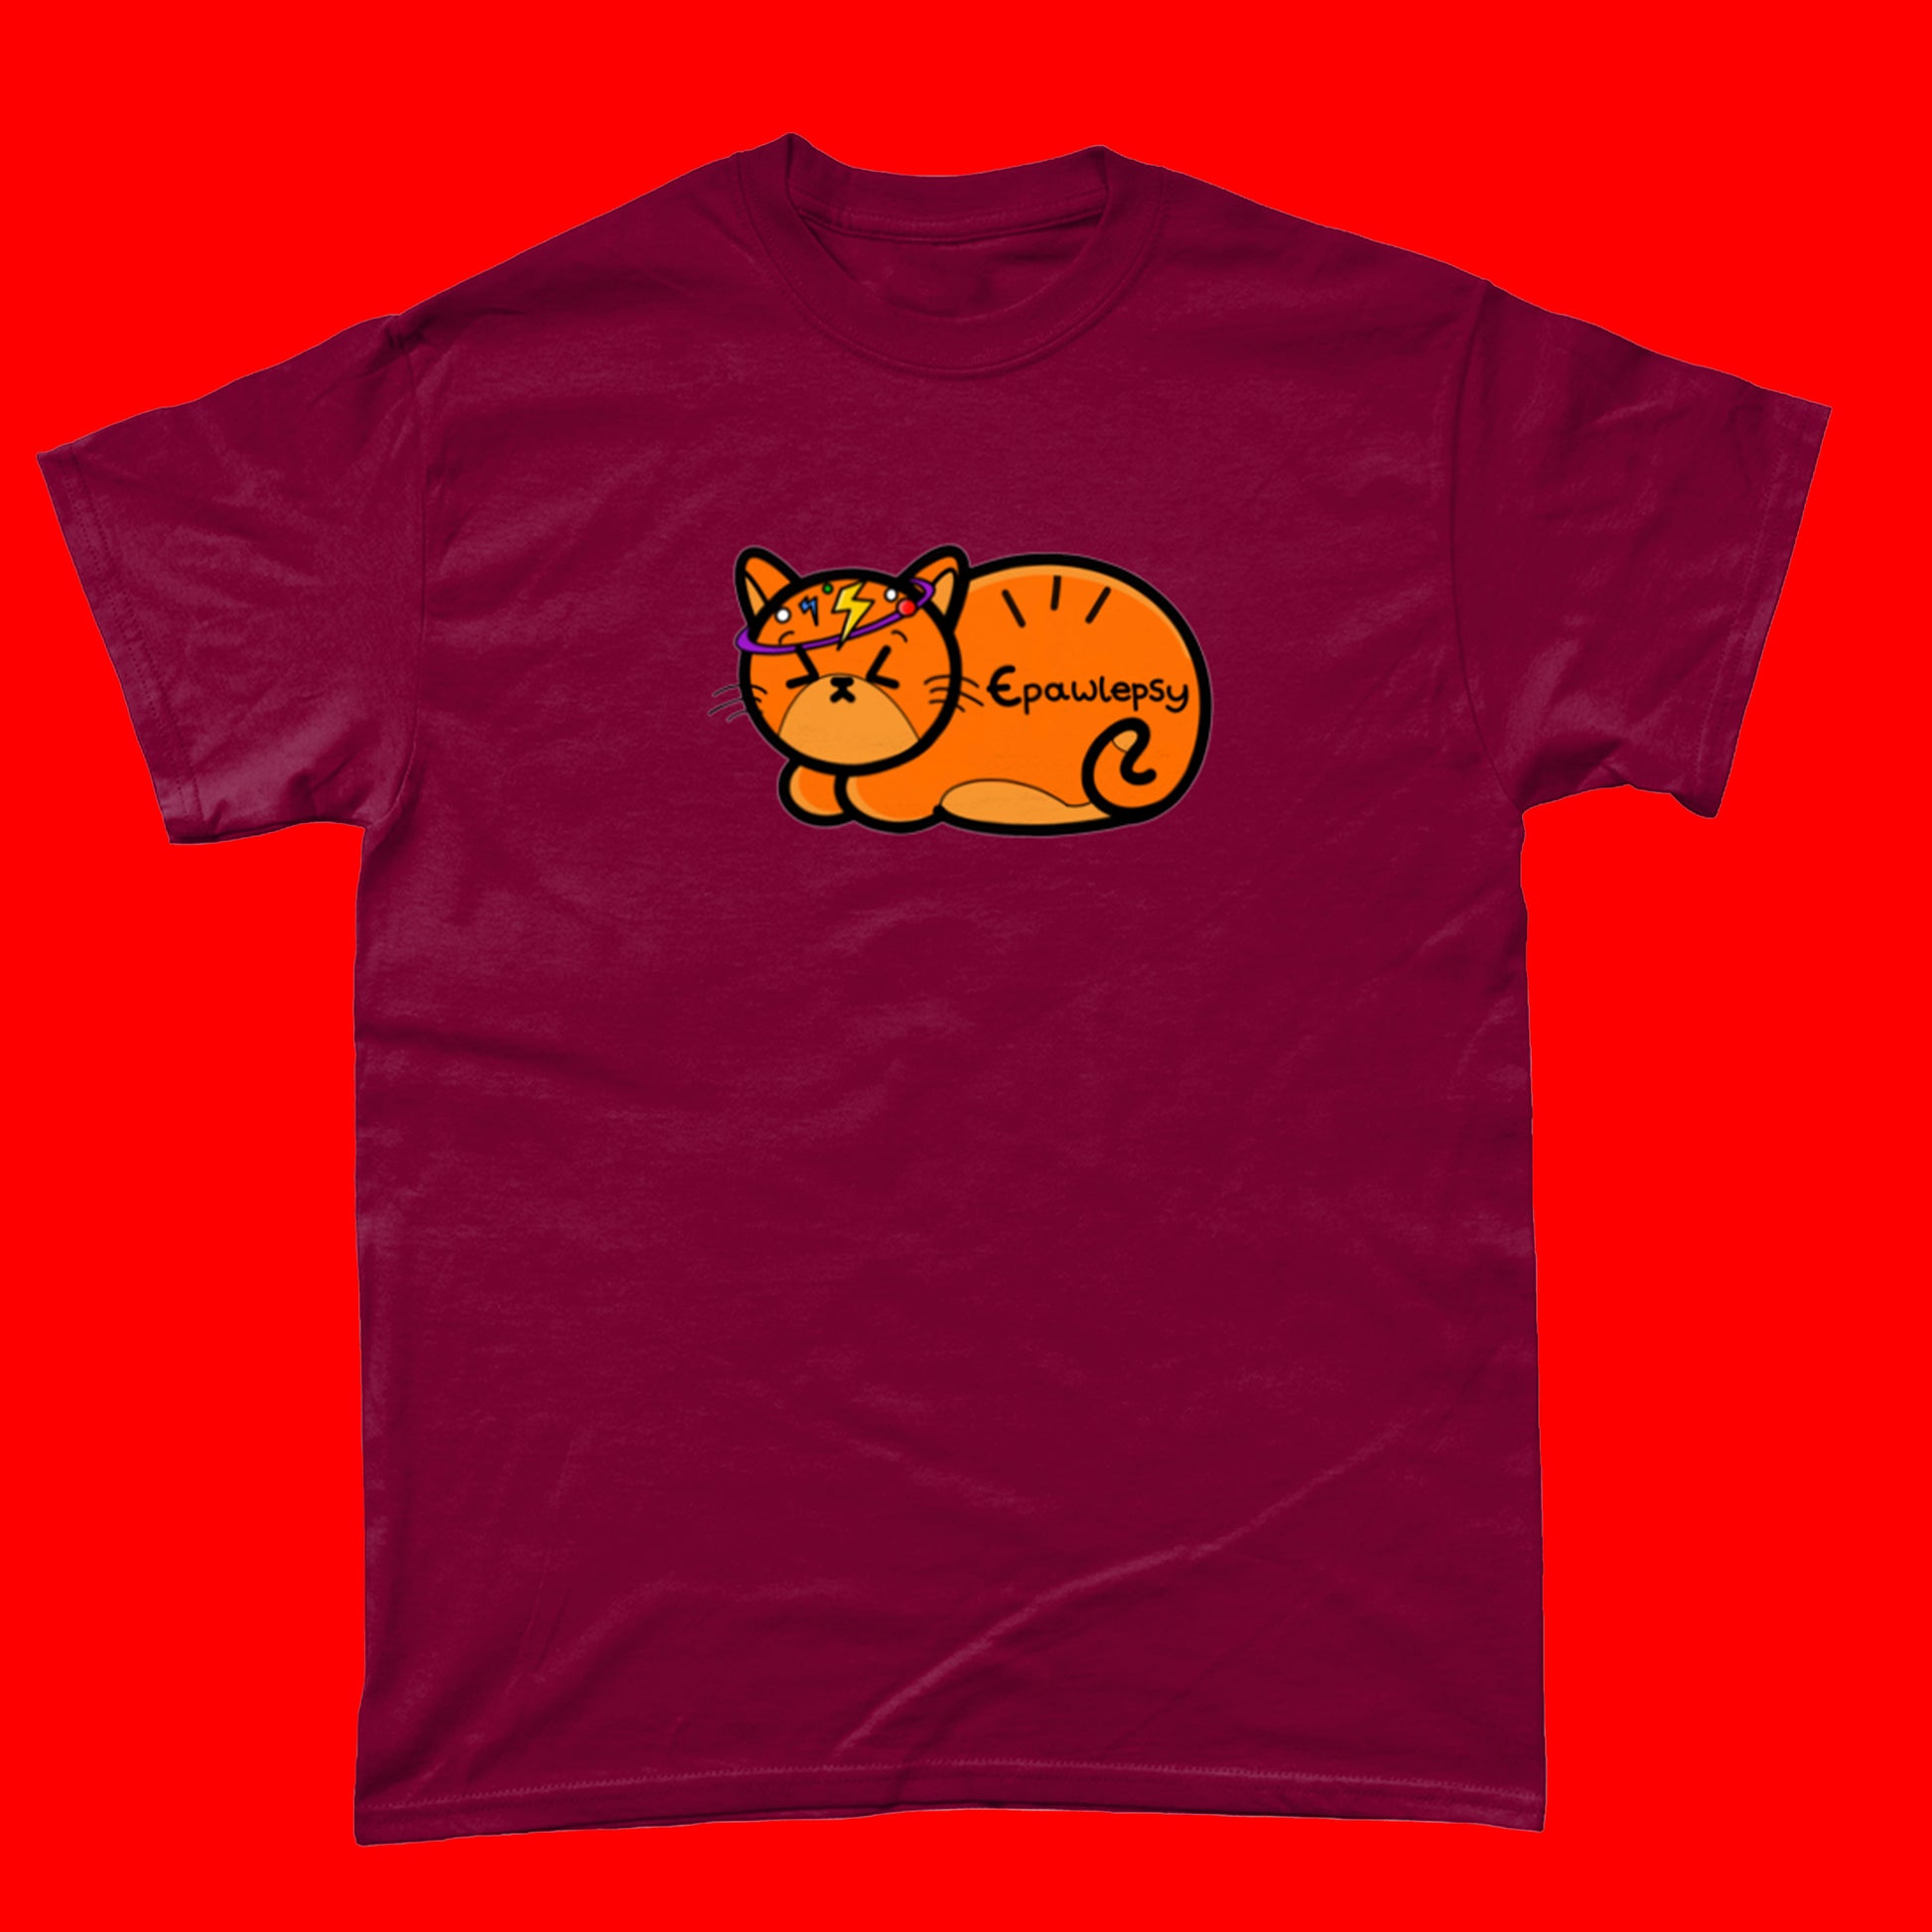 Epawlepsy Tee - Epilepsy. The cardinal red cotton t-shirt is a ginger cat with eyes scrunched closed and symbols to represent a dizzy spell drawn across his head. Epawlepsy is written on the cats stomach. Tee is designed to raise awareness for epilepsy